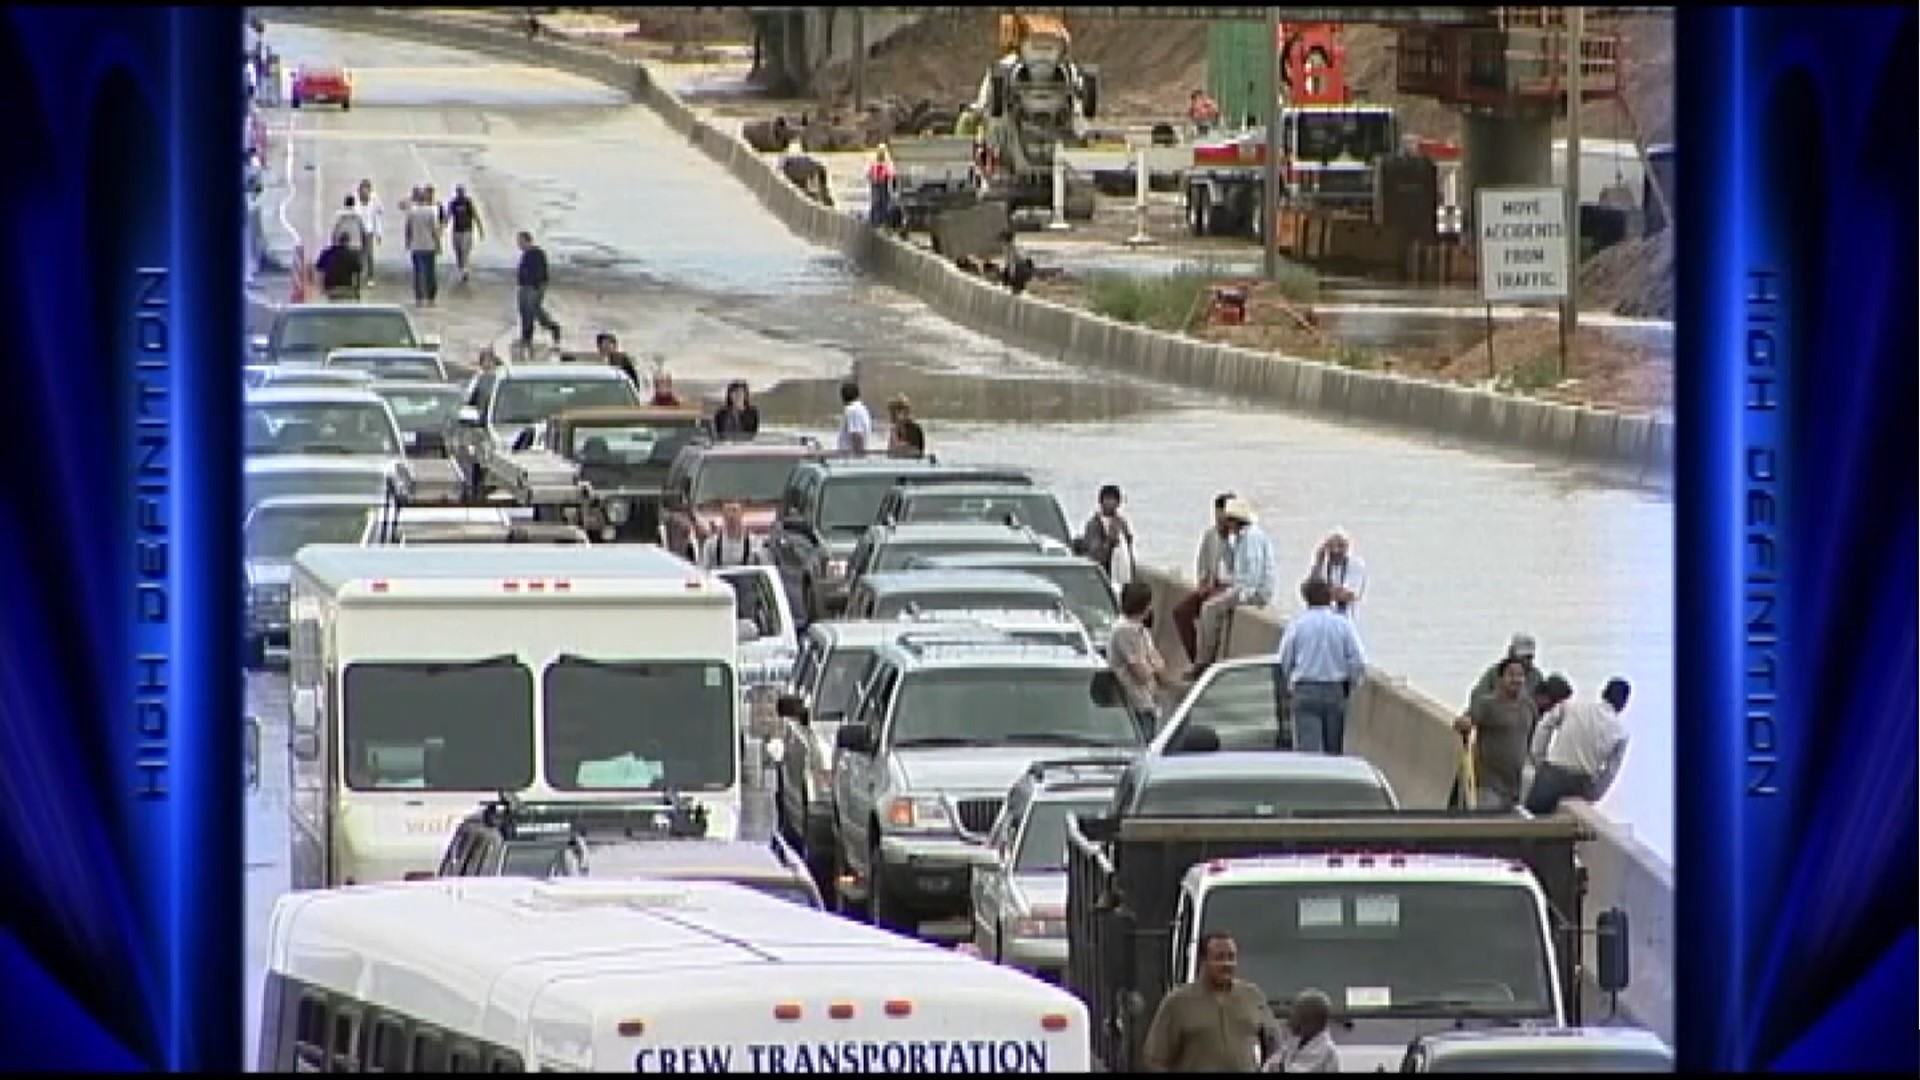 On Sept. 13, 2002, heavy rainfall flooded I-25 in a section of the highway called “The Narrows” in the vicinity of I-25 and Logan Street stranding motorists.